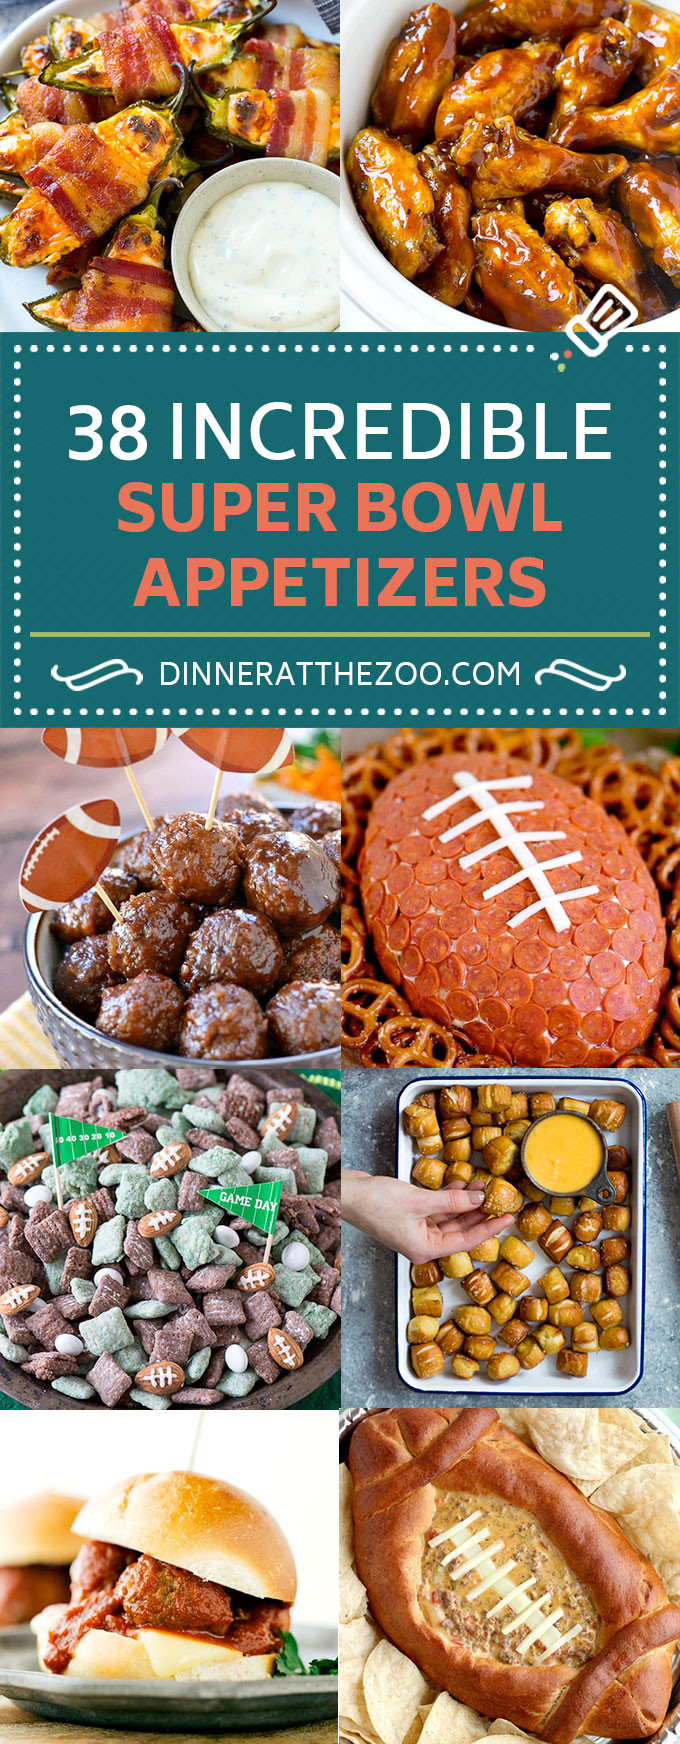 Chicken Super Bowl Recipes
 45 Incredible Super Bowl Appetizer Recipes Dinner at the Zoo